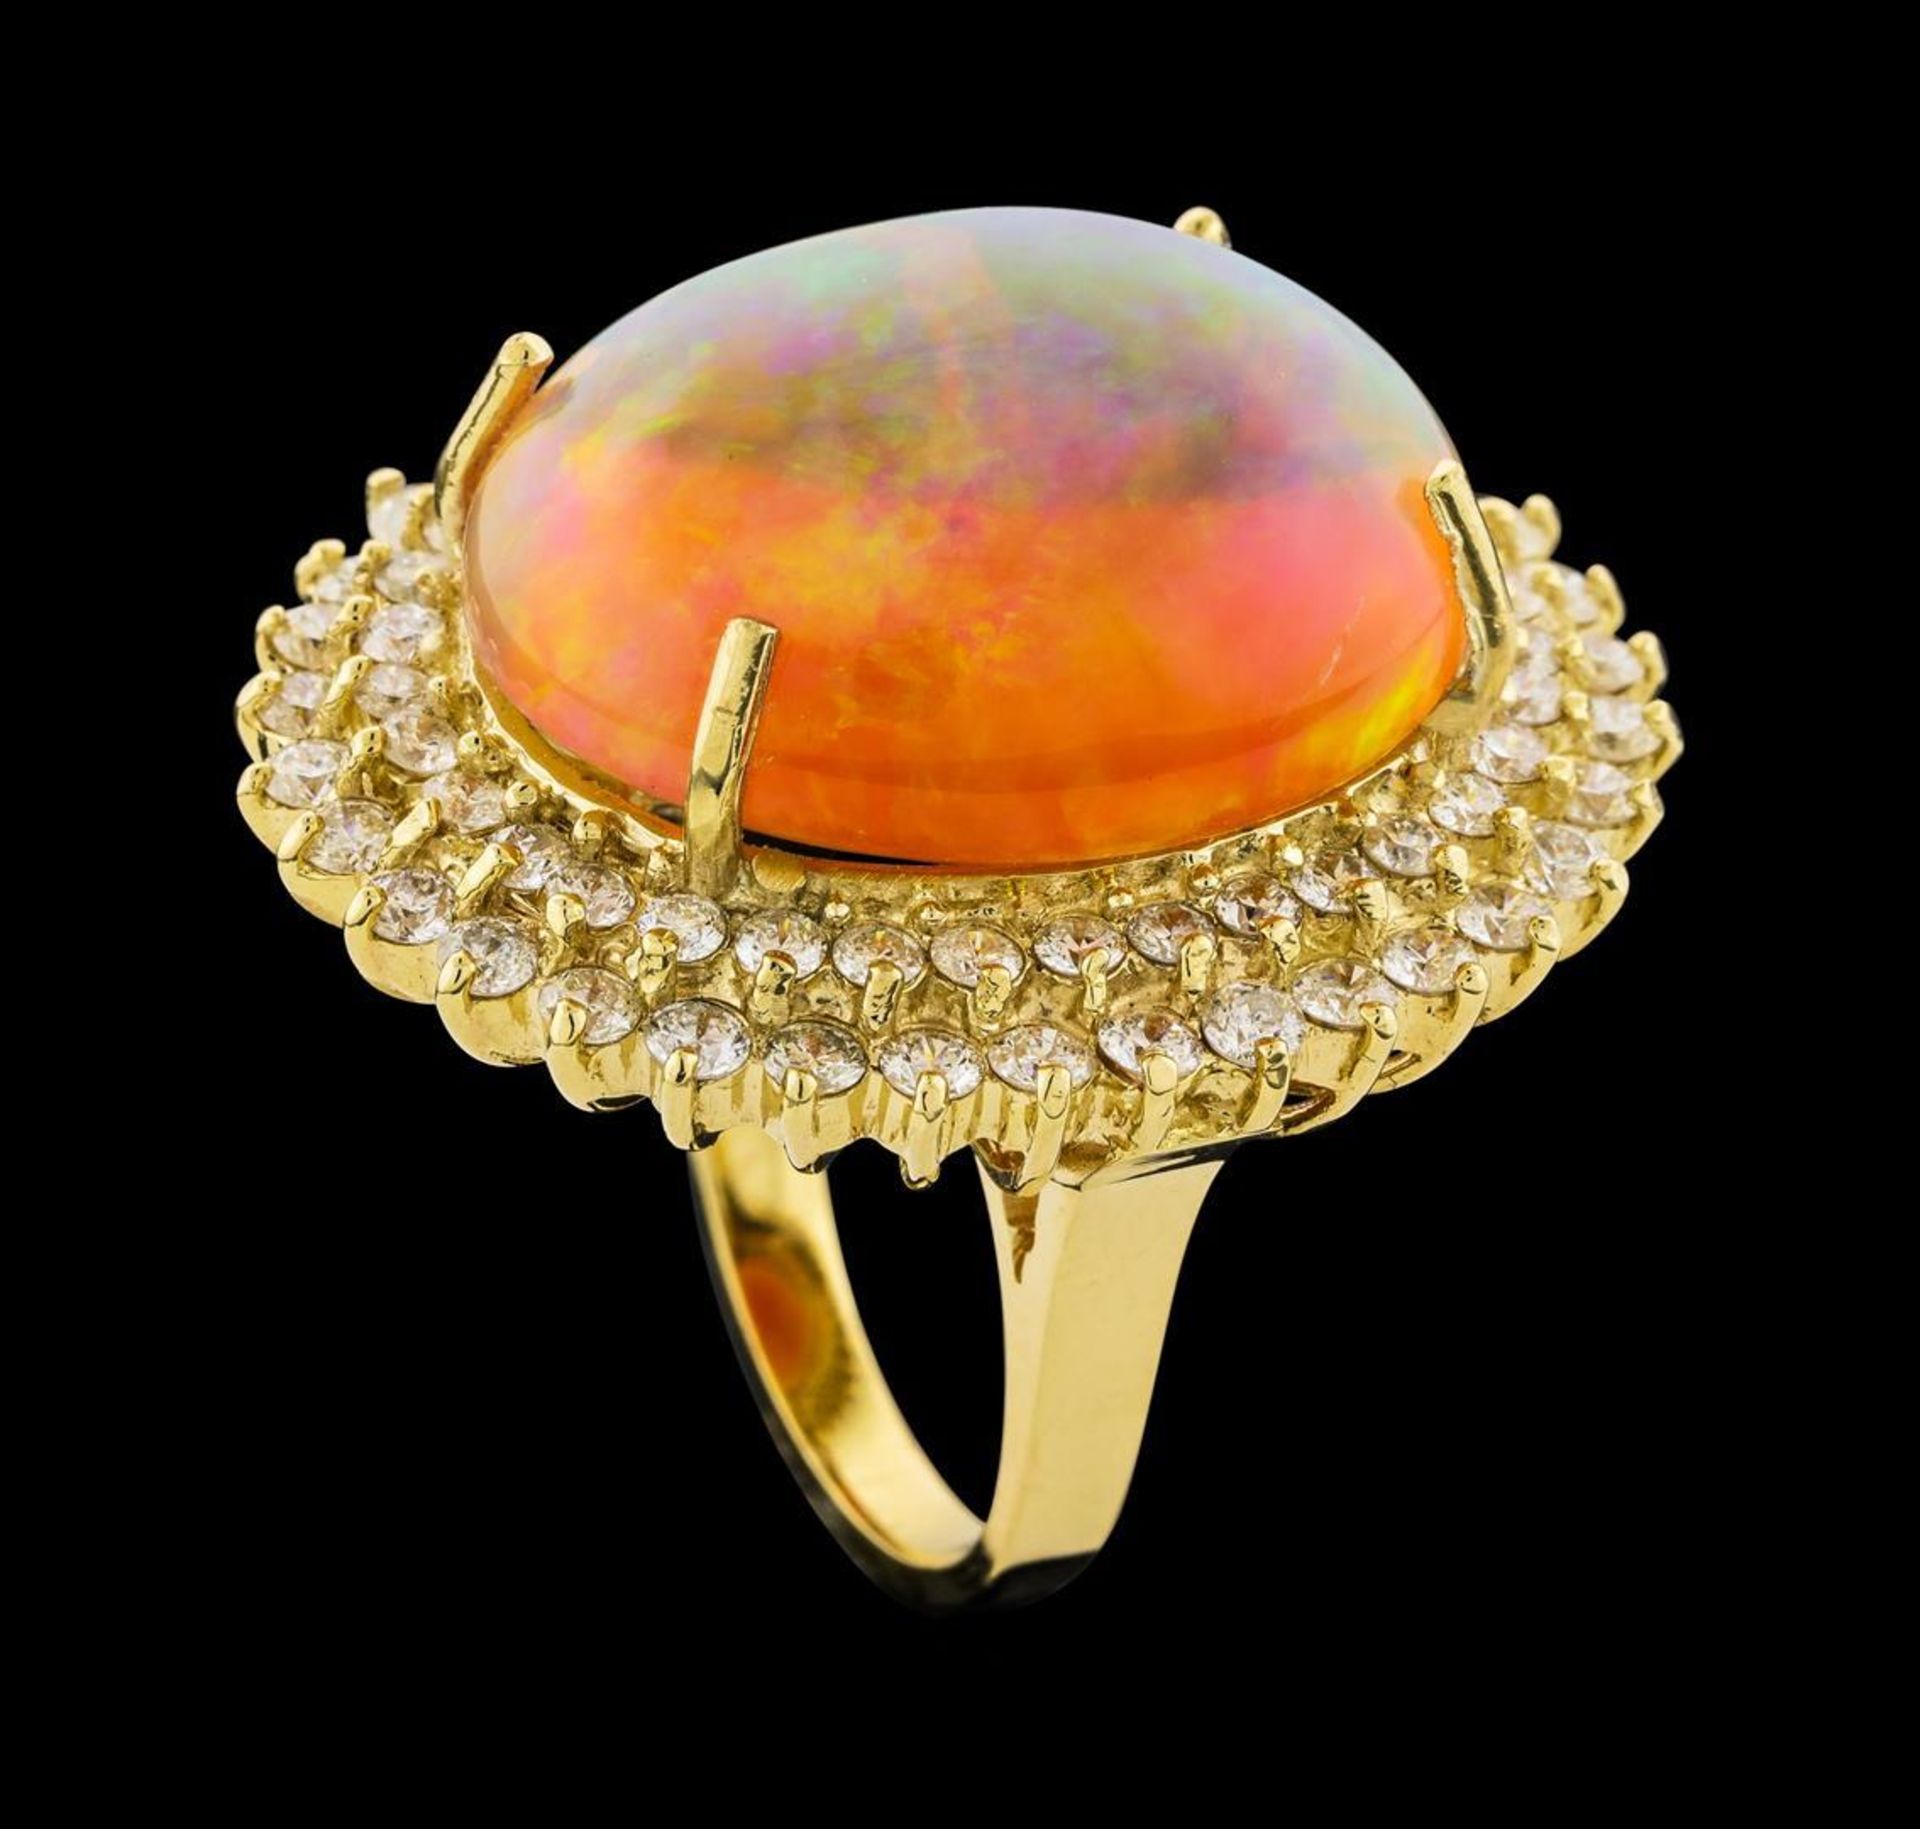 23.36 ctw Opal and Diamond Ring - 14KT Yellow Gold - Image 4 of 5